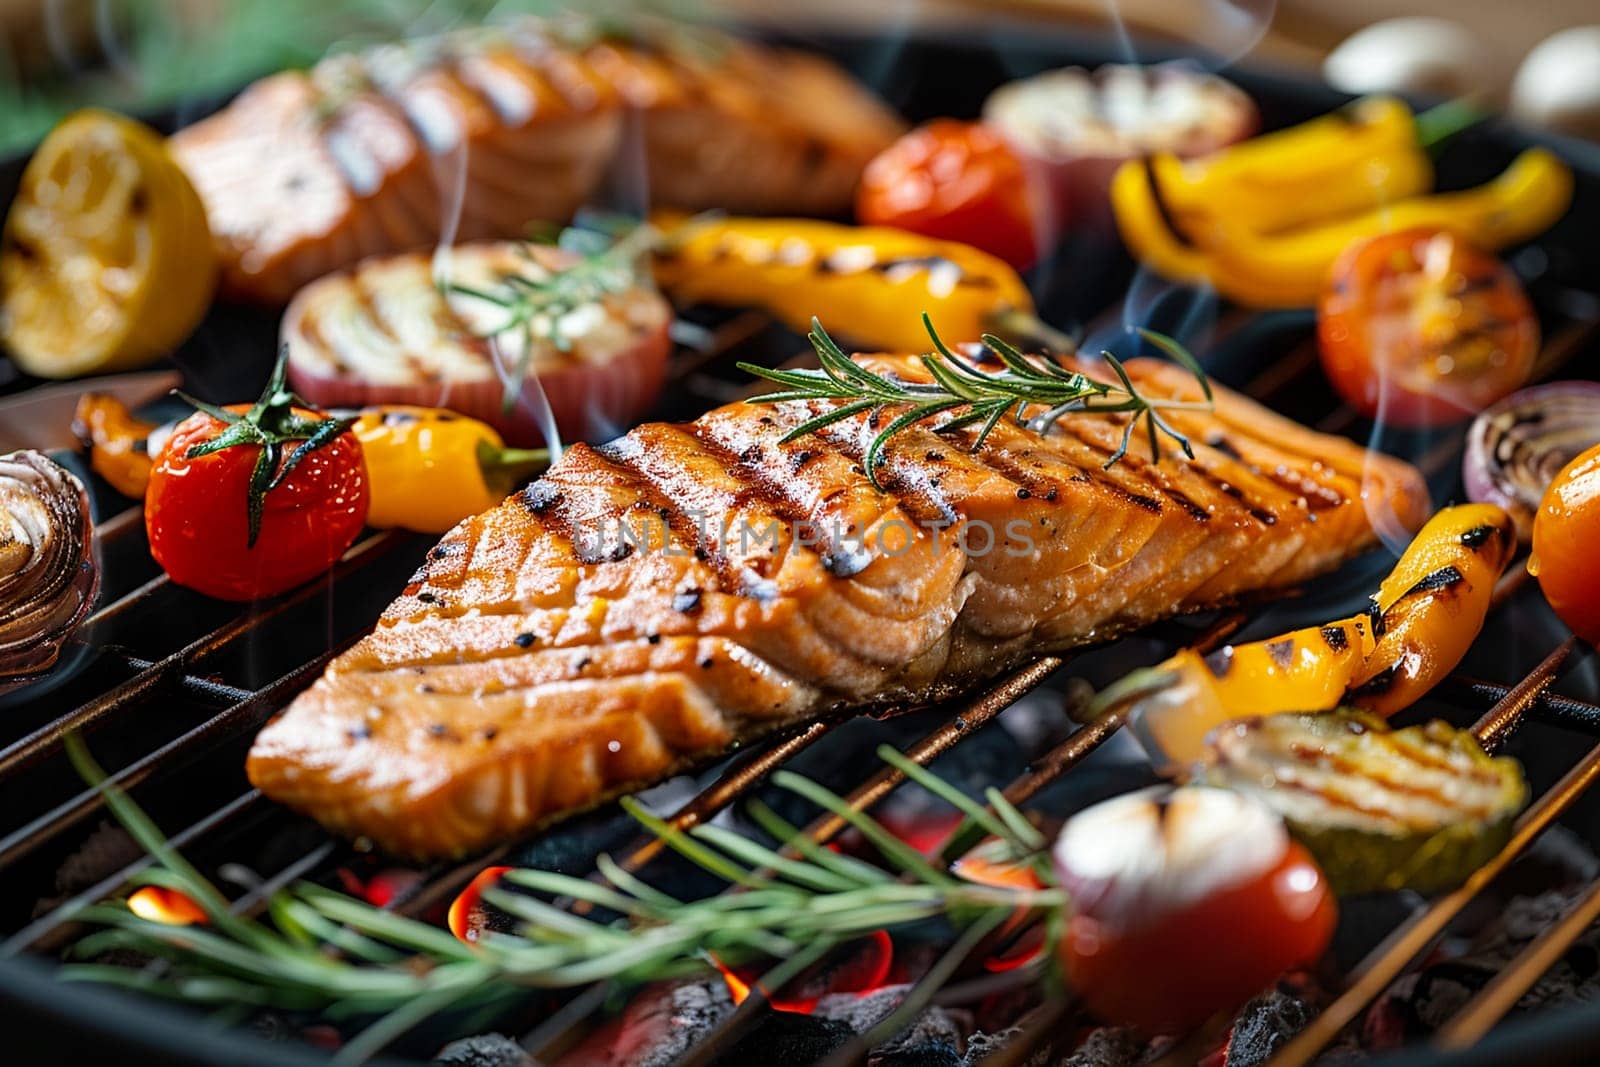 Grilled salmon, colorful vegetables, summer barbecue. Healthy eating outdoors by Yevhen89